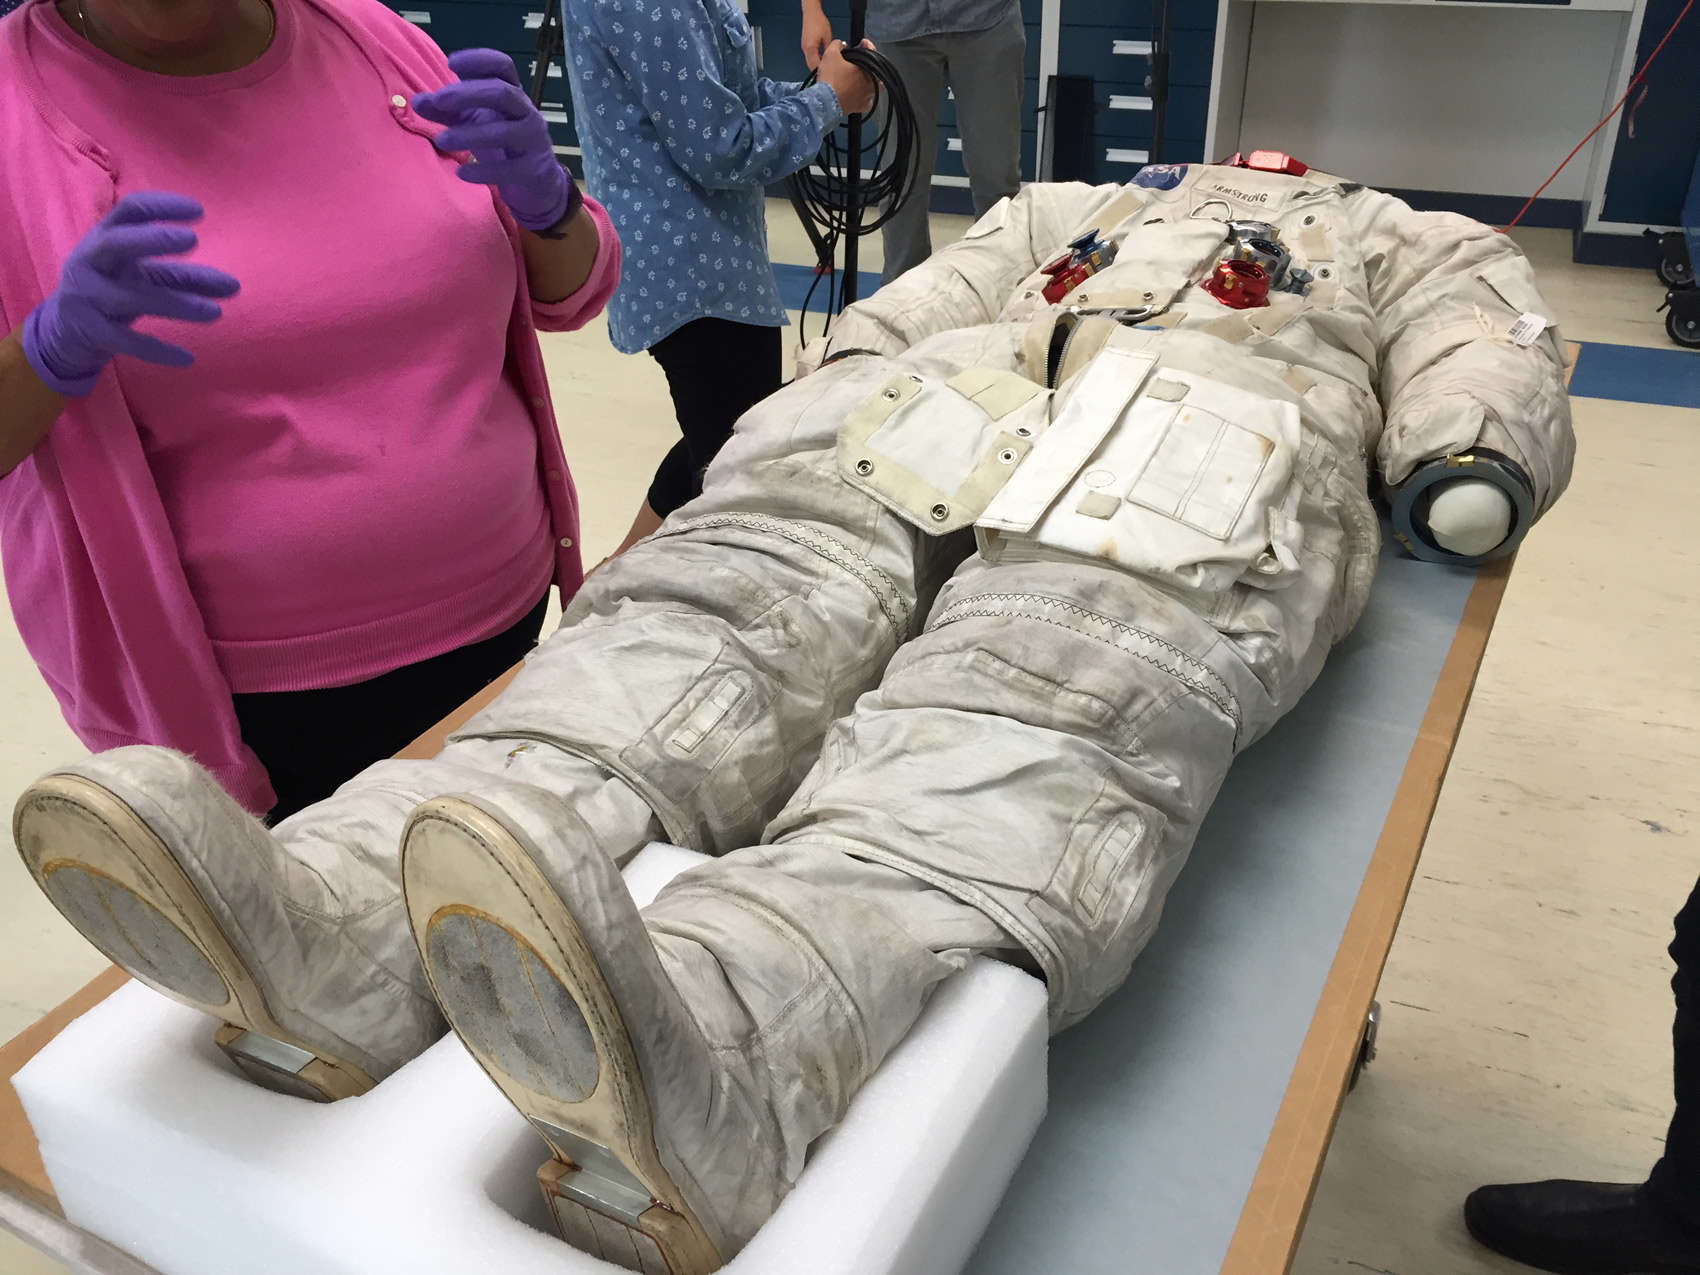 Neil Armstrong's lunar EVA suit from Apollo 11, getting ready for conservation at the Smithsonian National Air and Space Museum's Udvar-Hazy Center. Credit: Phil Plait